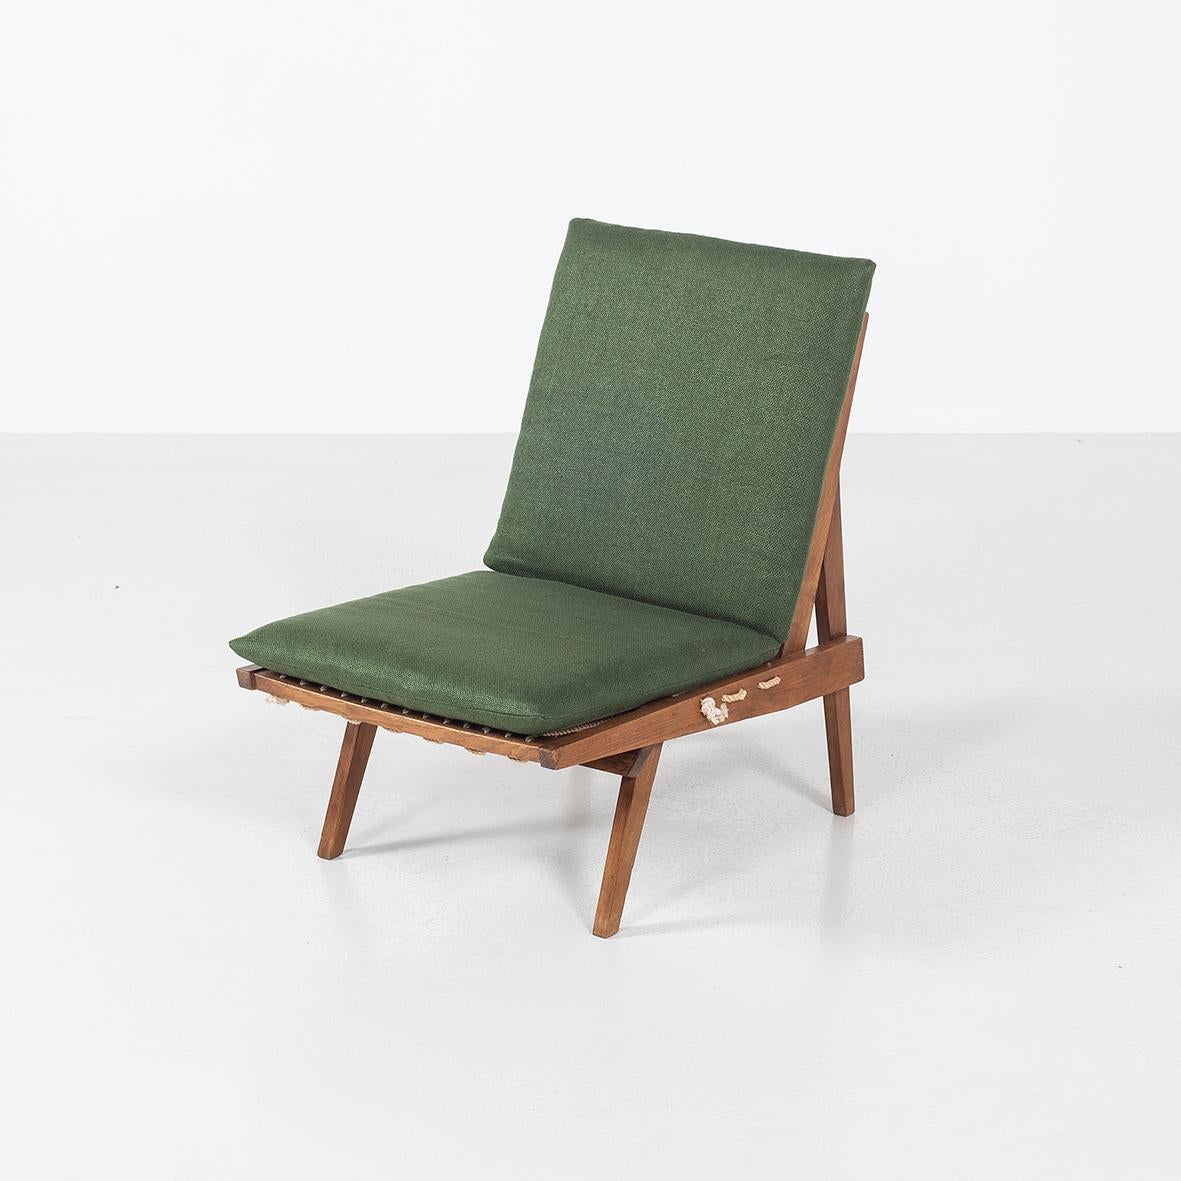 This rope chair was designed in 1952 by Riki Watanabe. Our piece is an original one from the very first edition. This chair was thought according to Japanese low seating, before becoming iconic and is still hand-produced today in carpenters